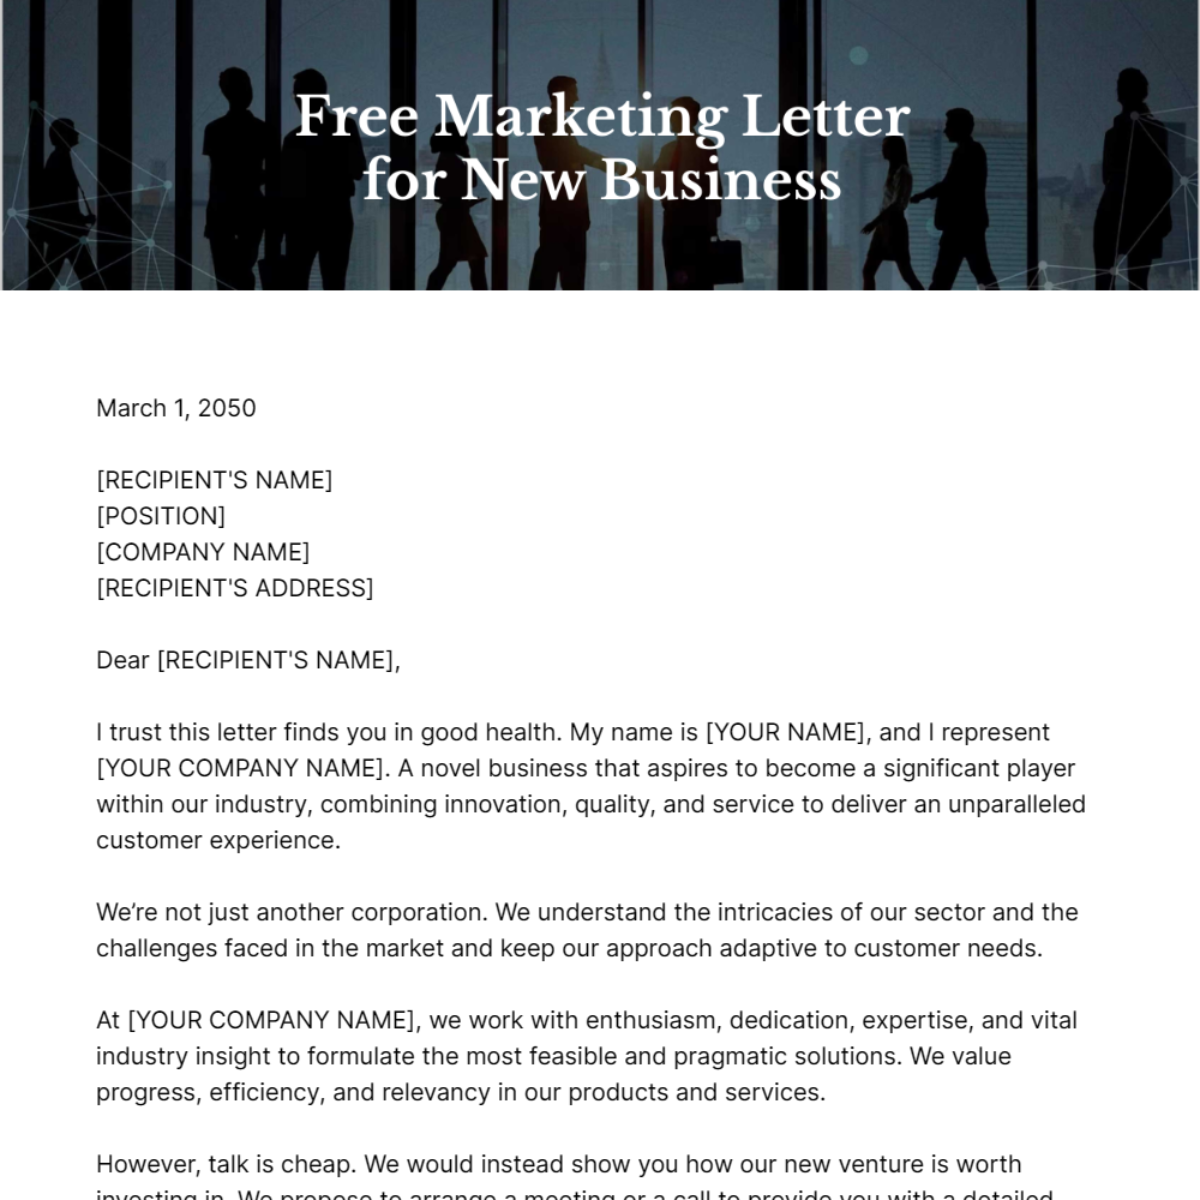 Marketing Letter for New Business Template